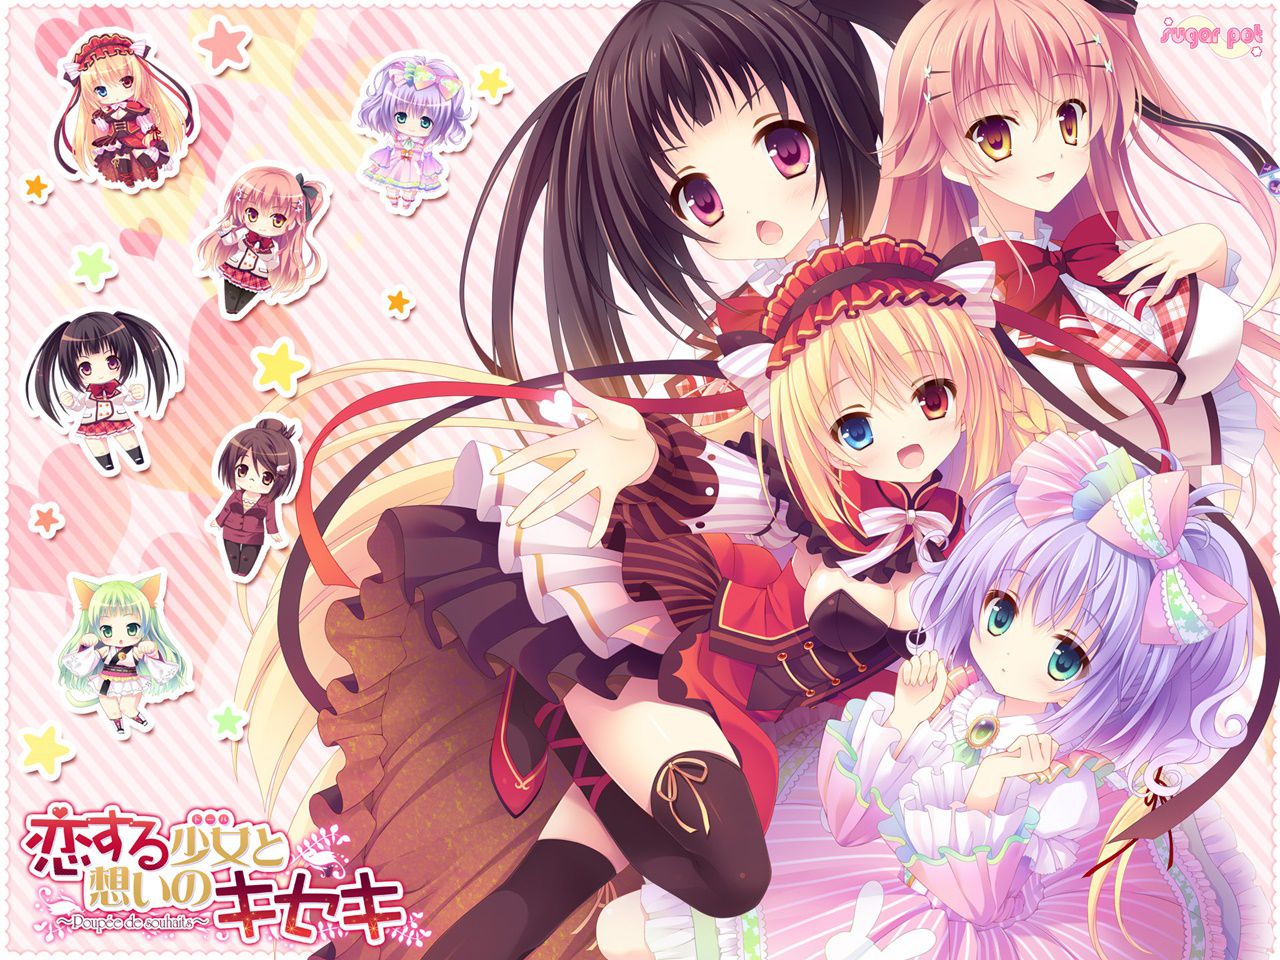 Girls in love and feelings not of miracle [18 eroge HCG] wallpapers, images 1